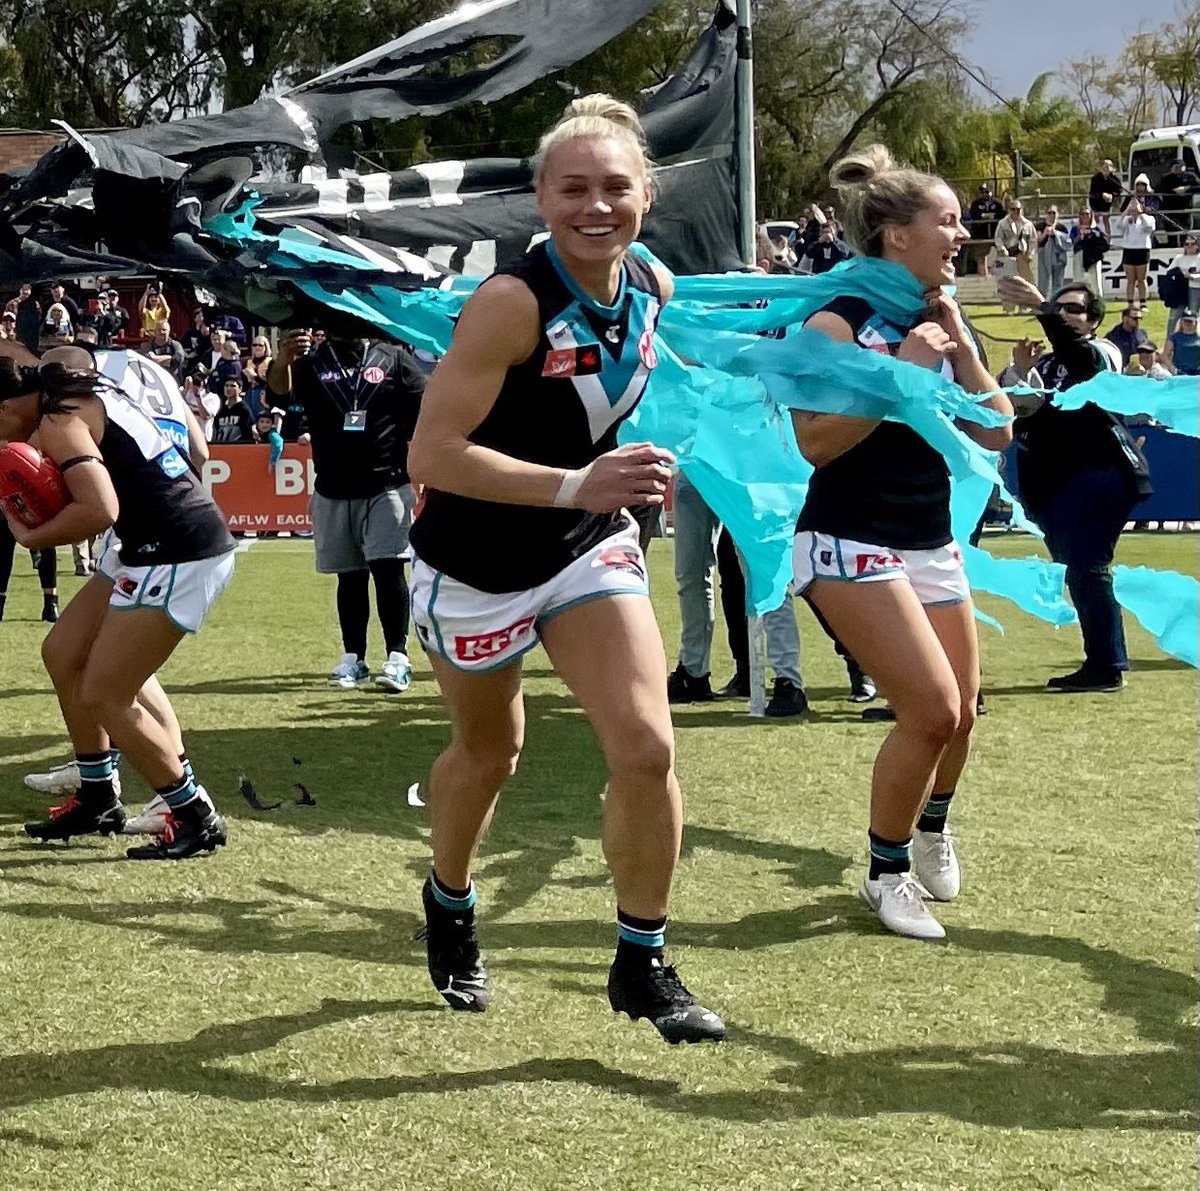 For @pafc_w 1st @aflwomens game  I realise I had the best seat in the ground as the team broke the banner - this photo will be my favourite for many years to come & I realise how great my WA @PAFC supporters are👏🏿👏🏿👏🏿@maartychokito @Jeaksy1 @erinphillips131 #herstoryinthemaking